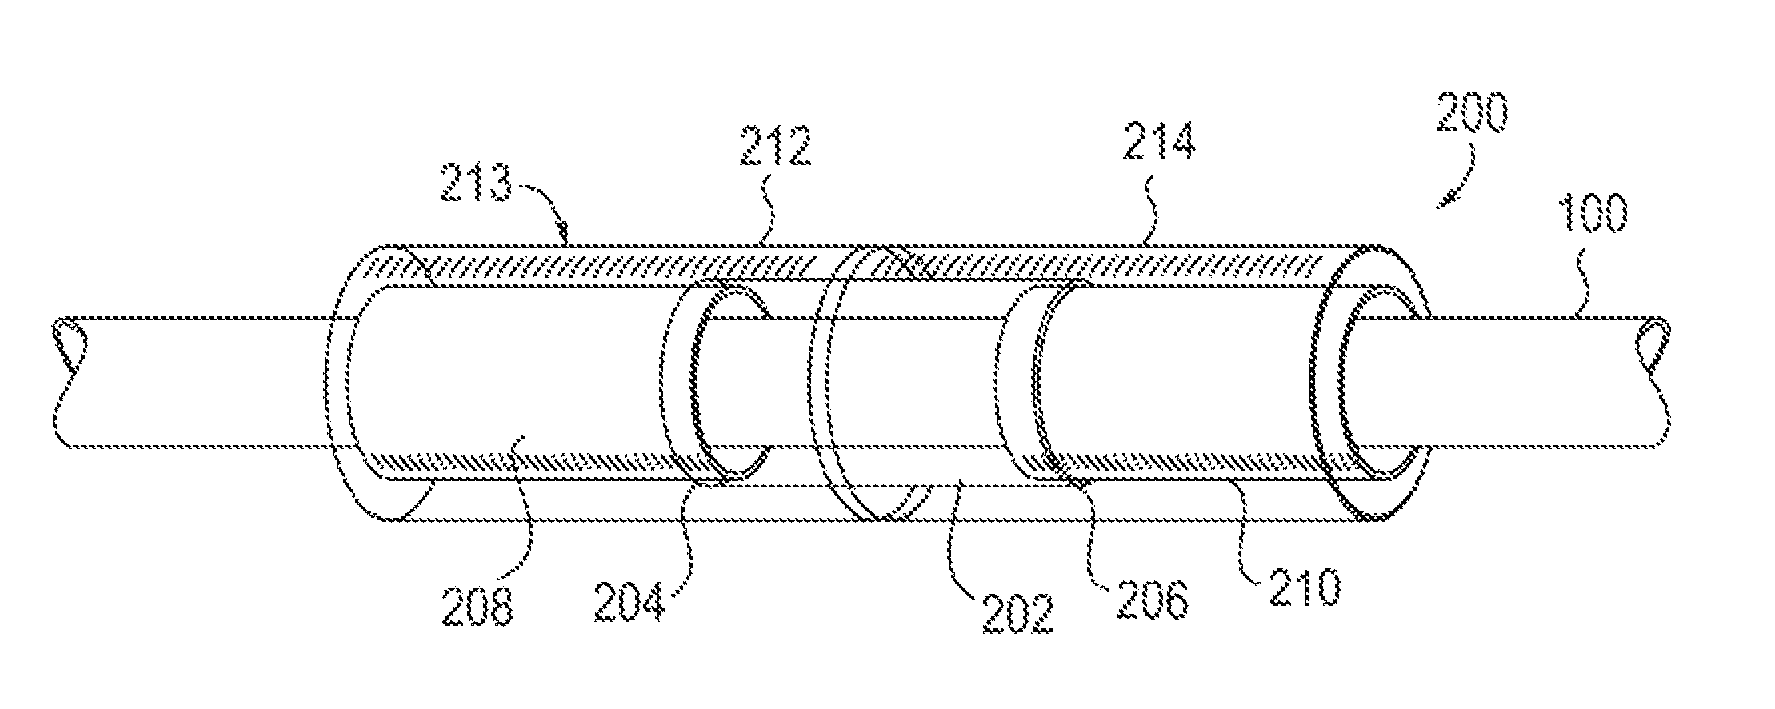 Twist-grip anchors and methods of use